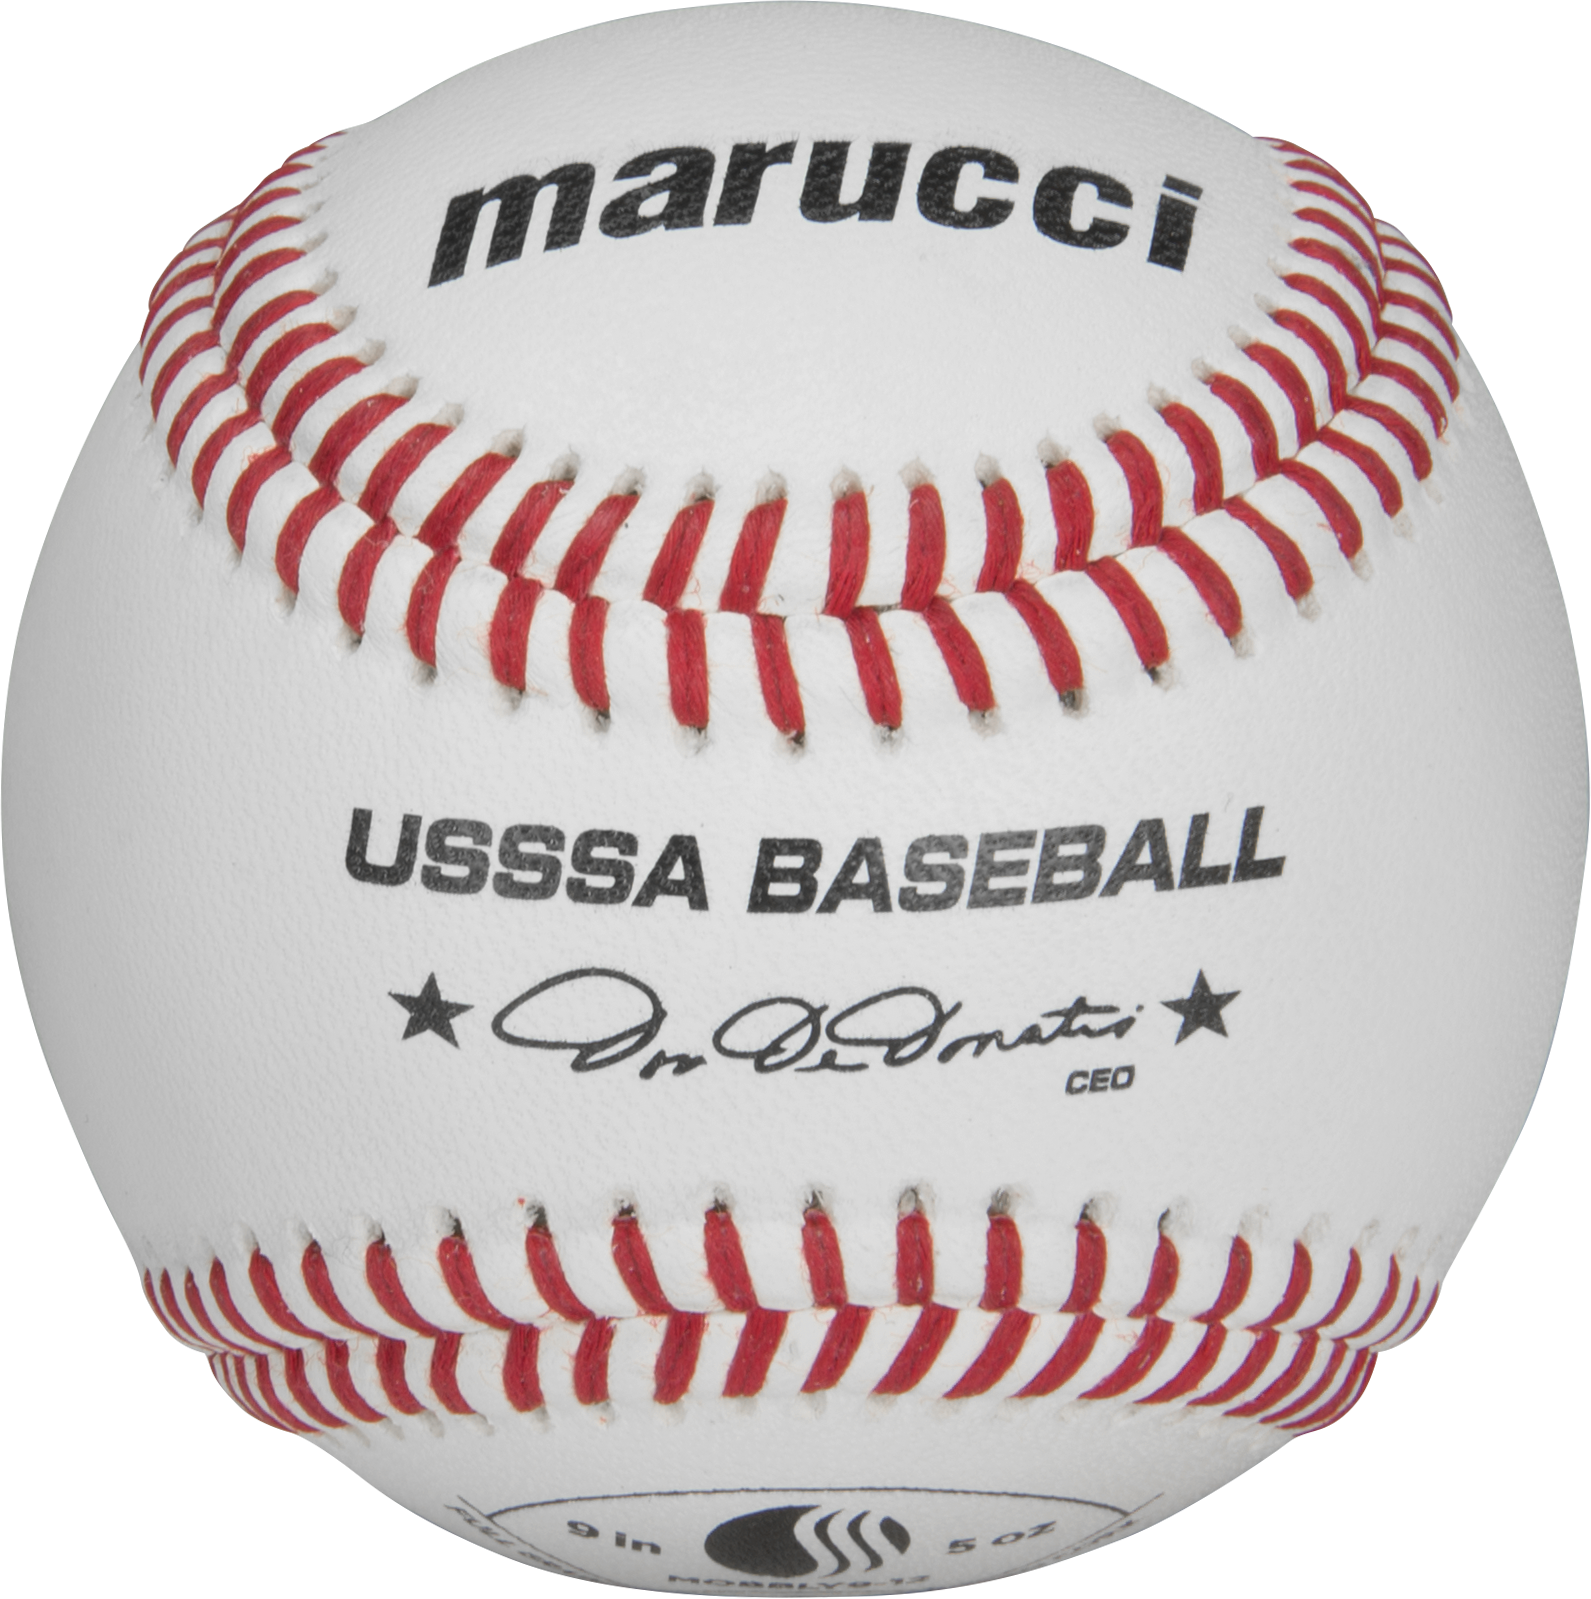 marucci-usssa-mobblry9-12-baseballs-1-dozen MOBBLRY9-12 Marucci 849817088531 Consistency and craftsmanship Commitment to quality and understanding of players Designed